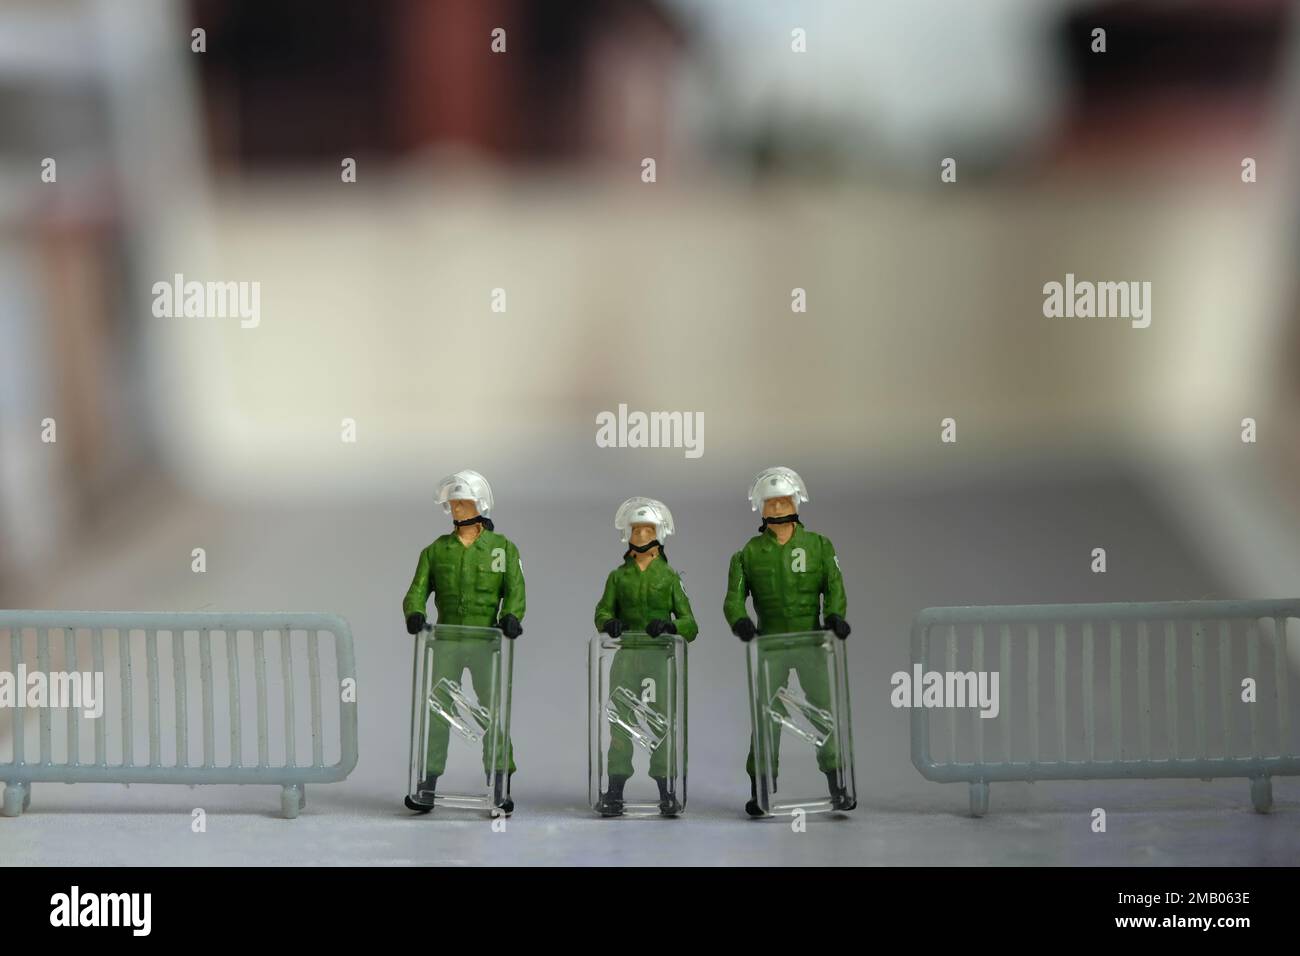 Miniature people toy figure photography. A military anti riot armored army standing on barricades, securing the road way. Image photo Stock Photo